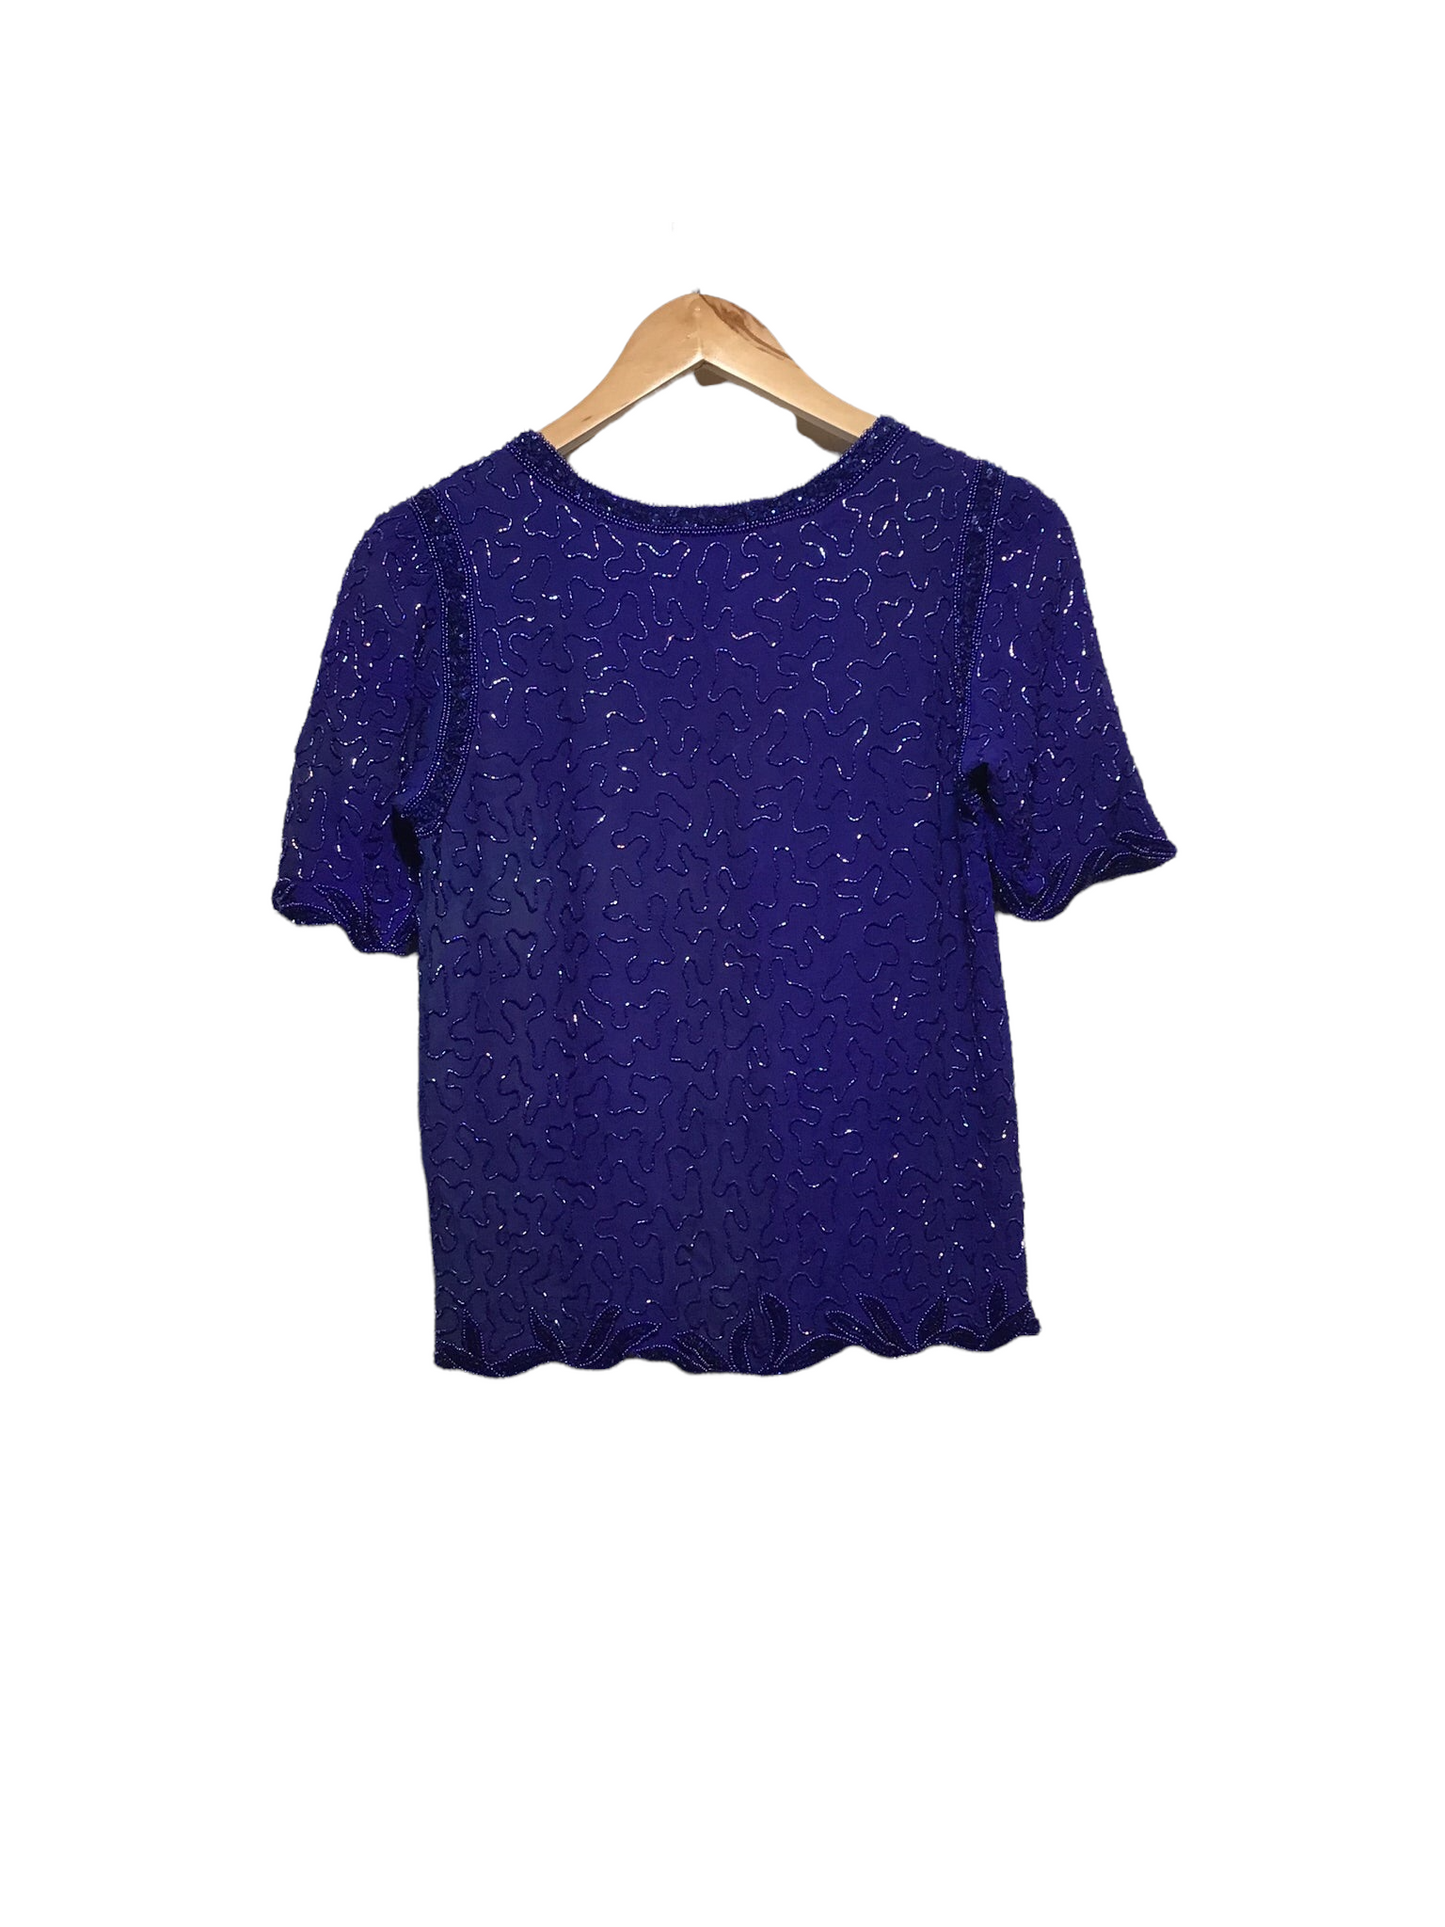 Embellished Silk Evening Top (Size S)